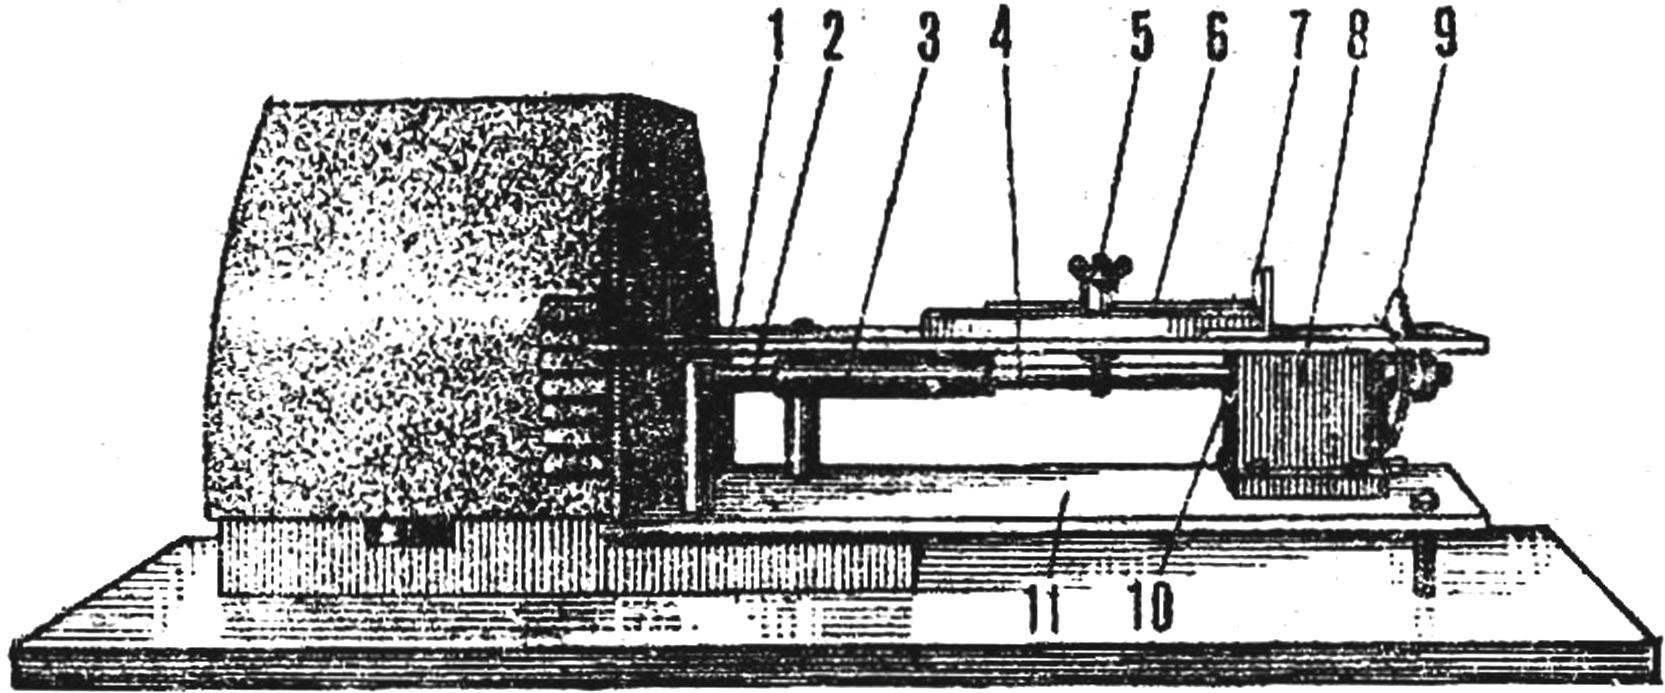 General view and main parts of the machine UK-4